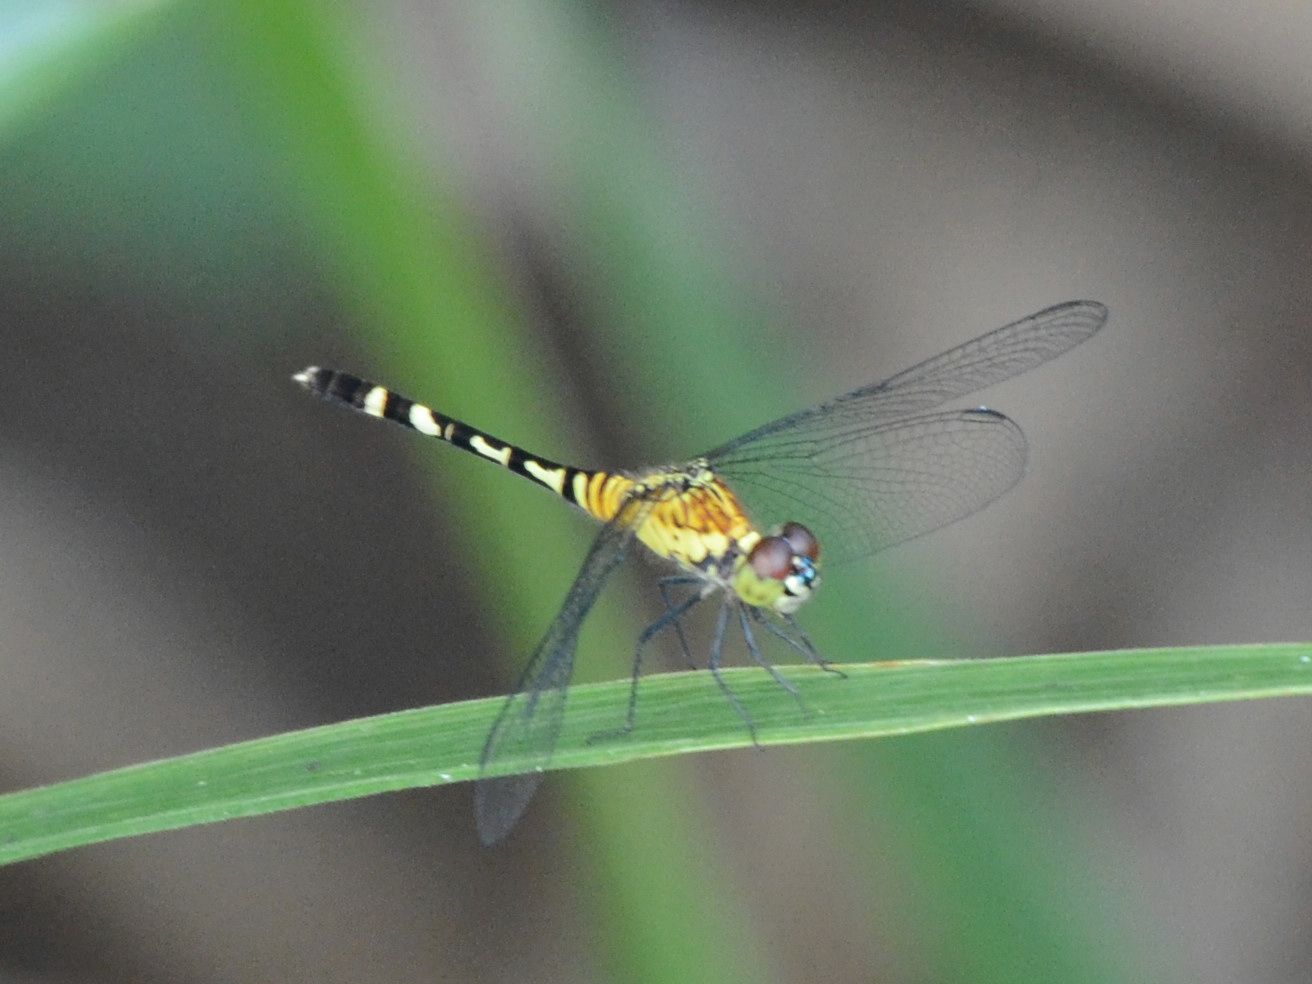 Click picture to see more Dragonflies.